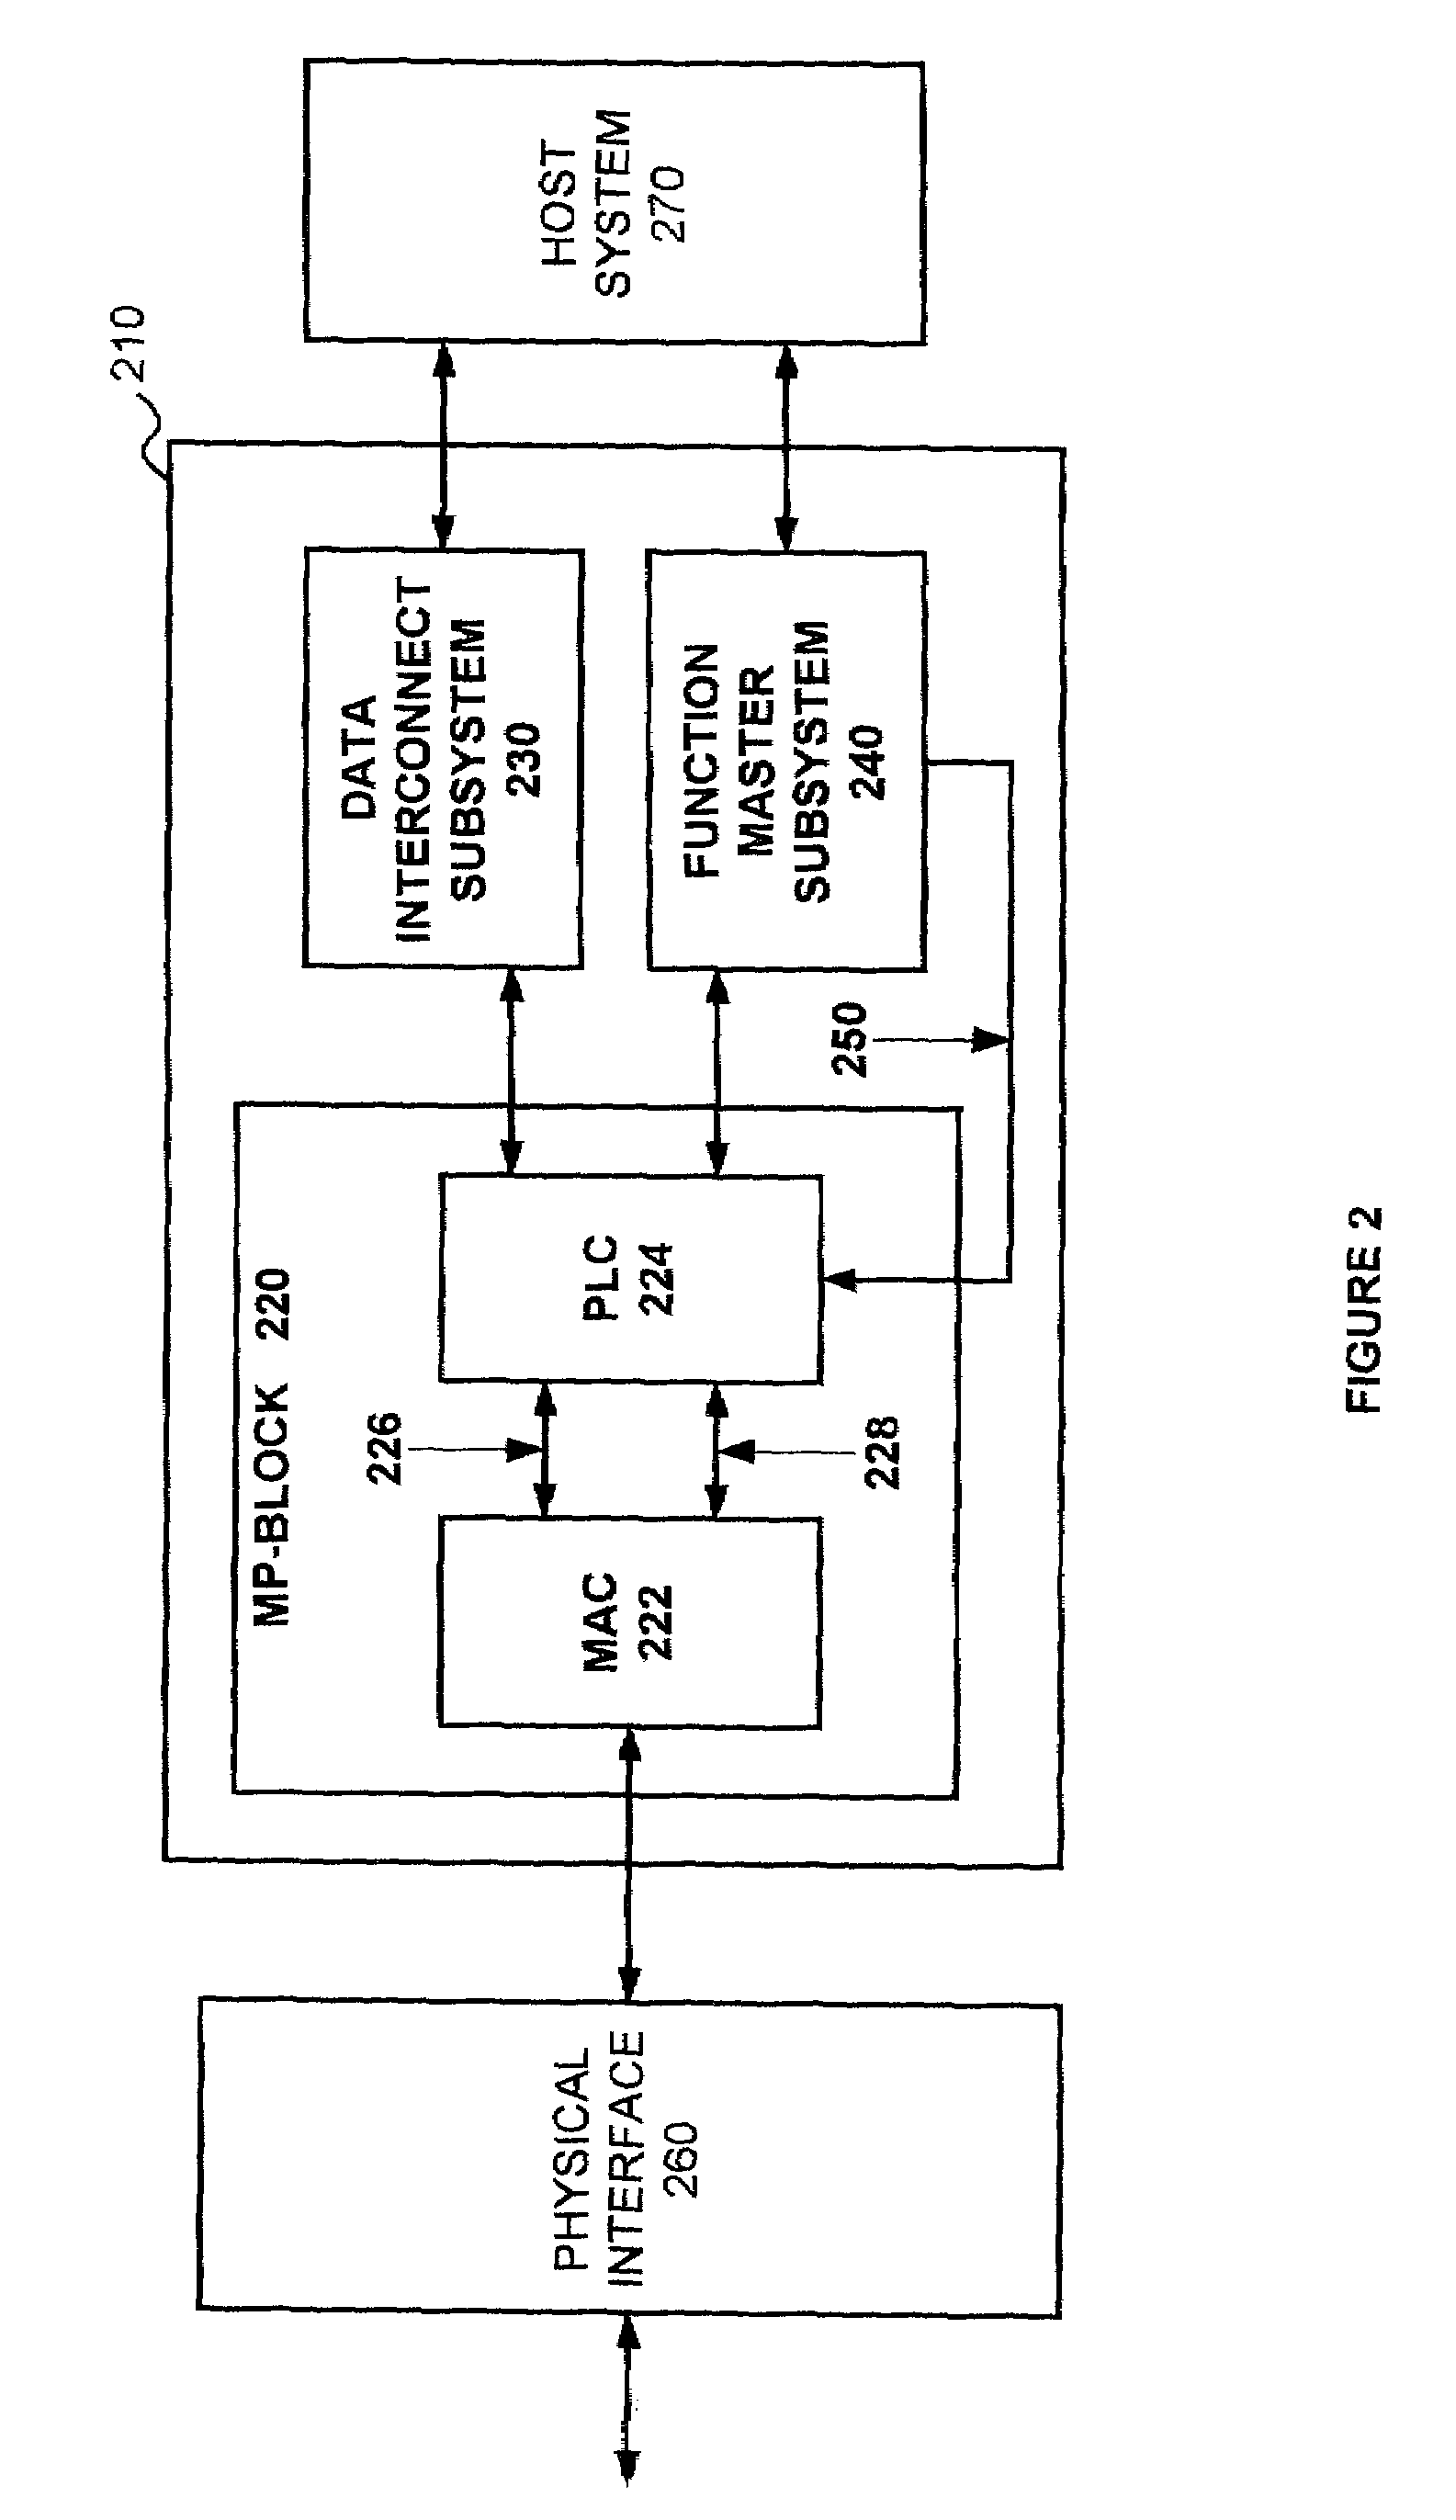 Field programmable network application specific integrated circuit and a method of operation thereof